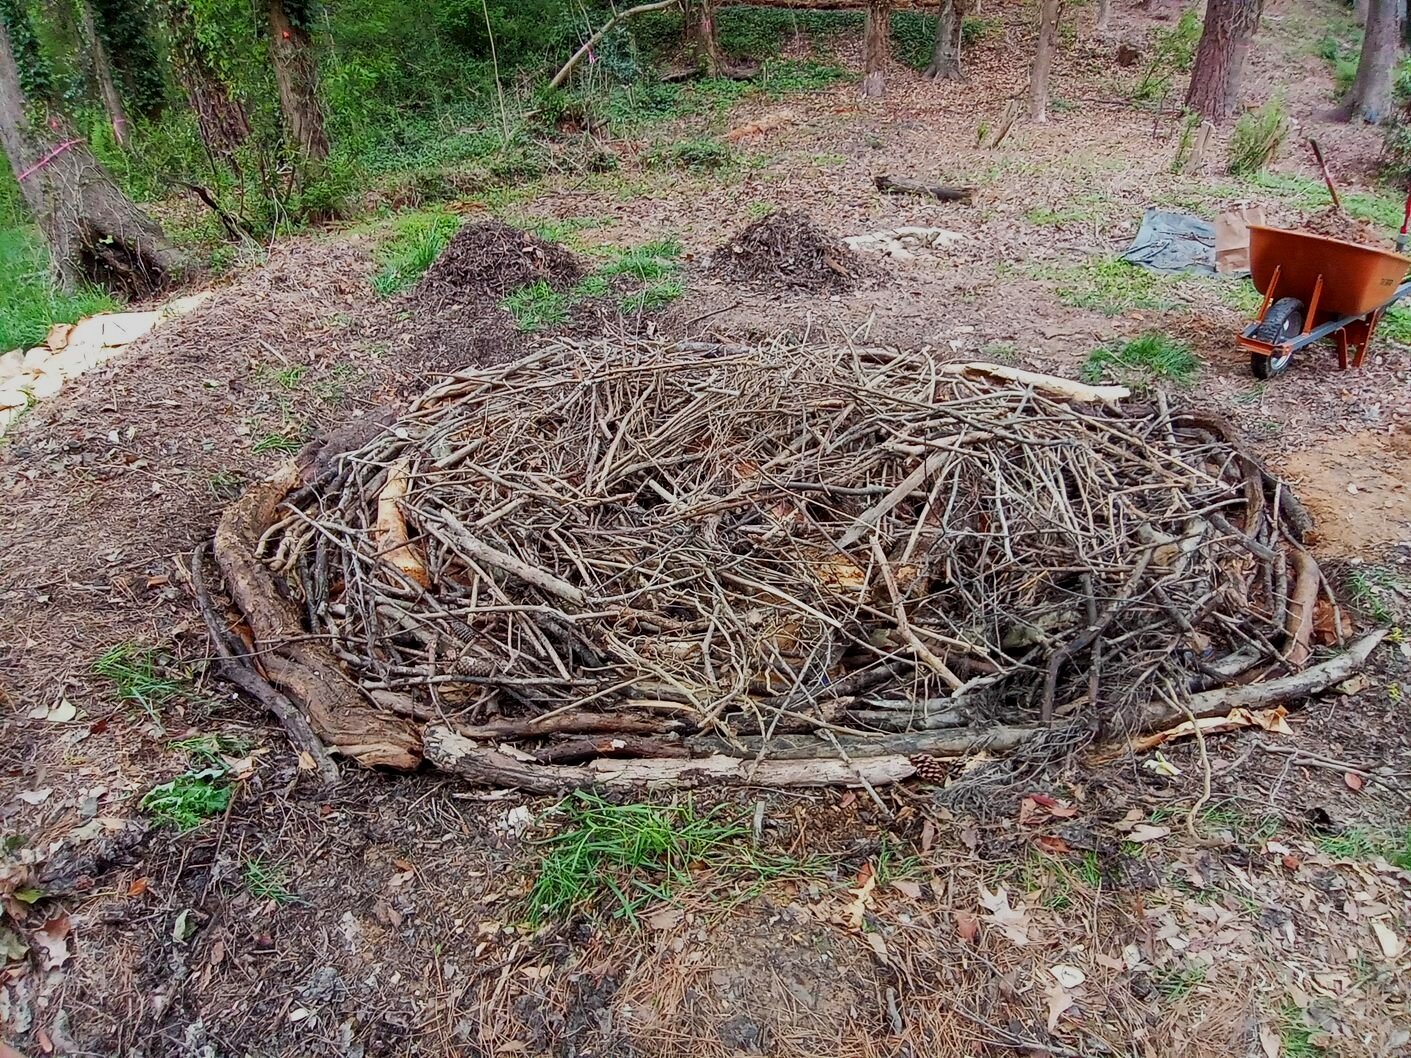  As the wood decomposes, the rain bed will sink into a bowl shape. 